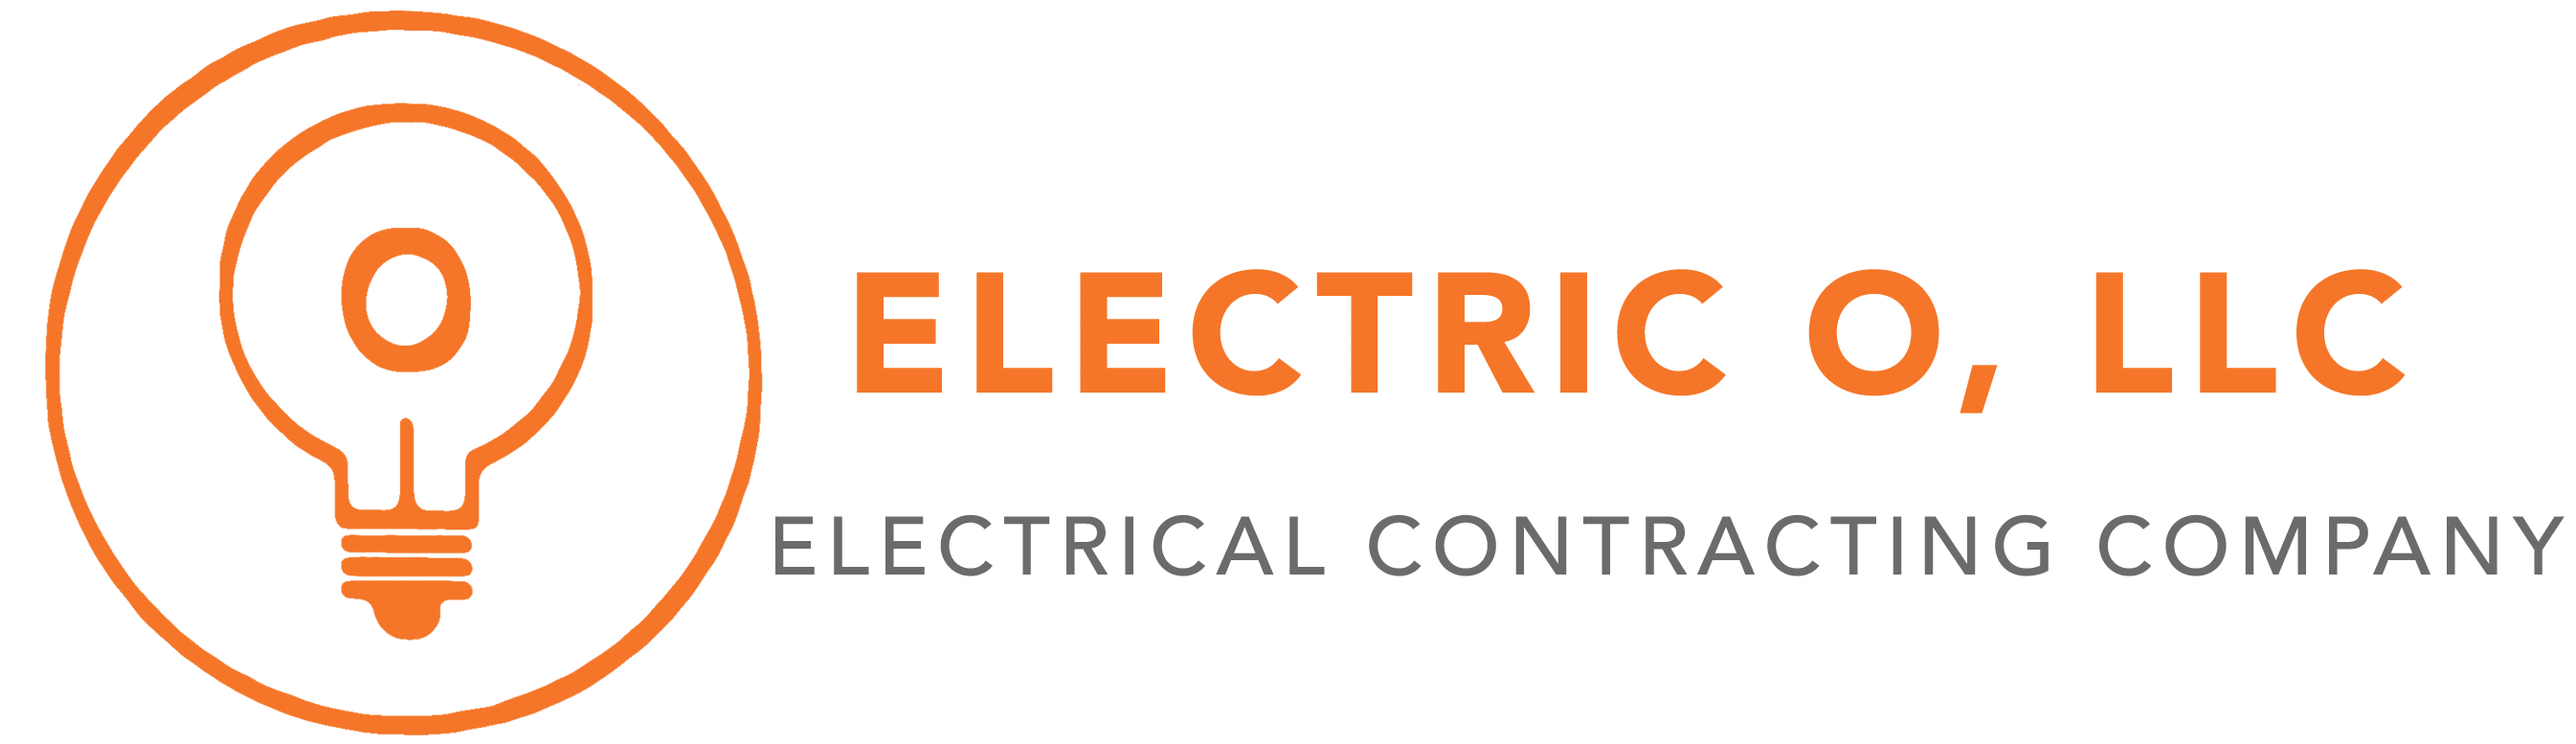 Commercial Electric Logo - Commercial Electrical Services | Weirton, WV Electrician | Electric O